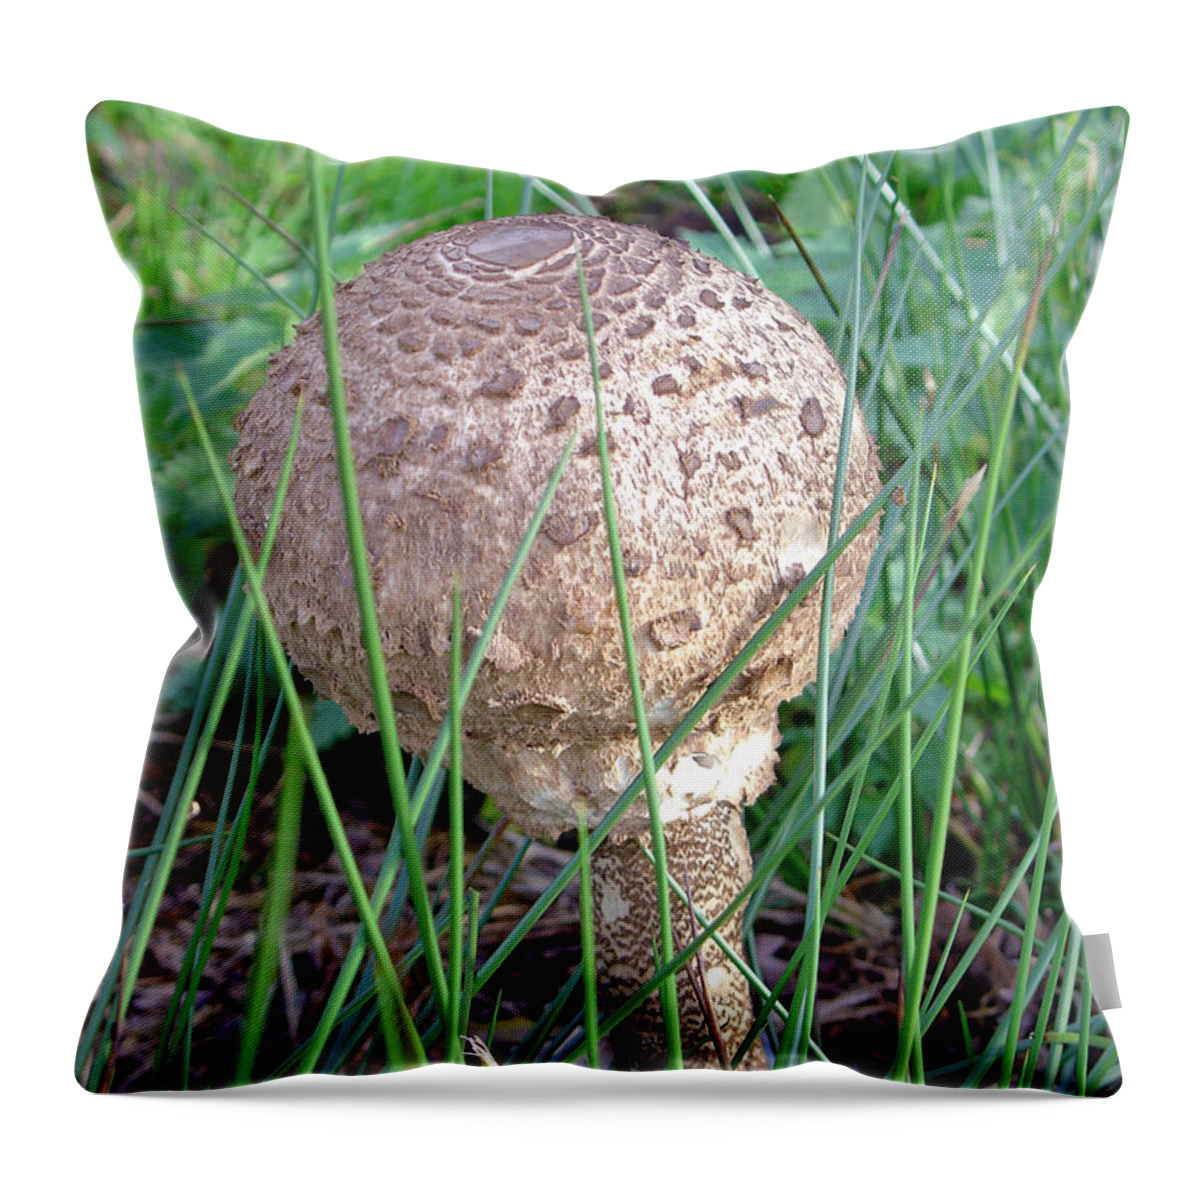 Europe Throw Pillow featuring the photograph Funky Fungi  by Rod Johnson